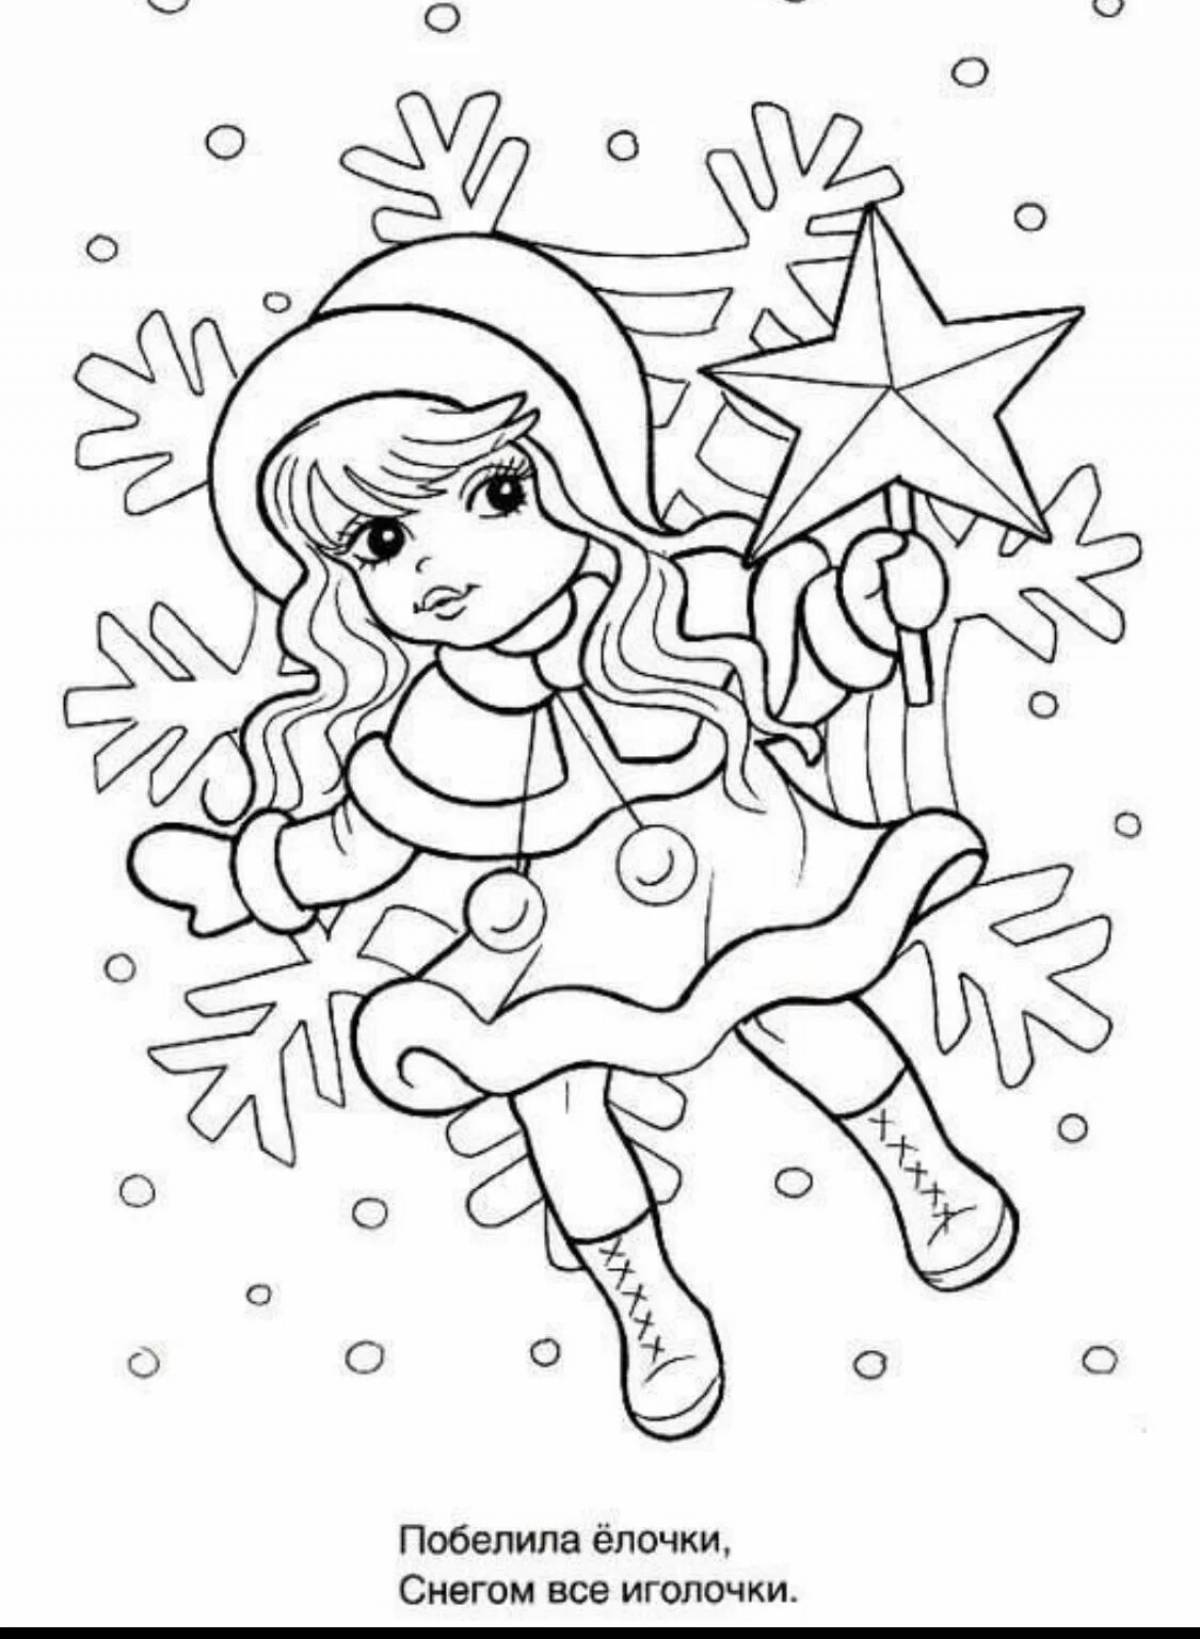 Adorable Christmas coloring book for girls 8 years old